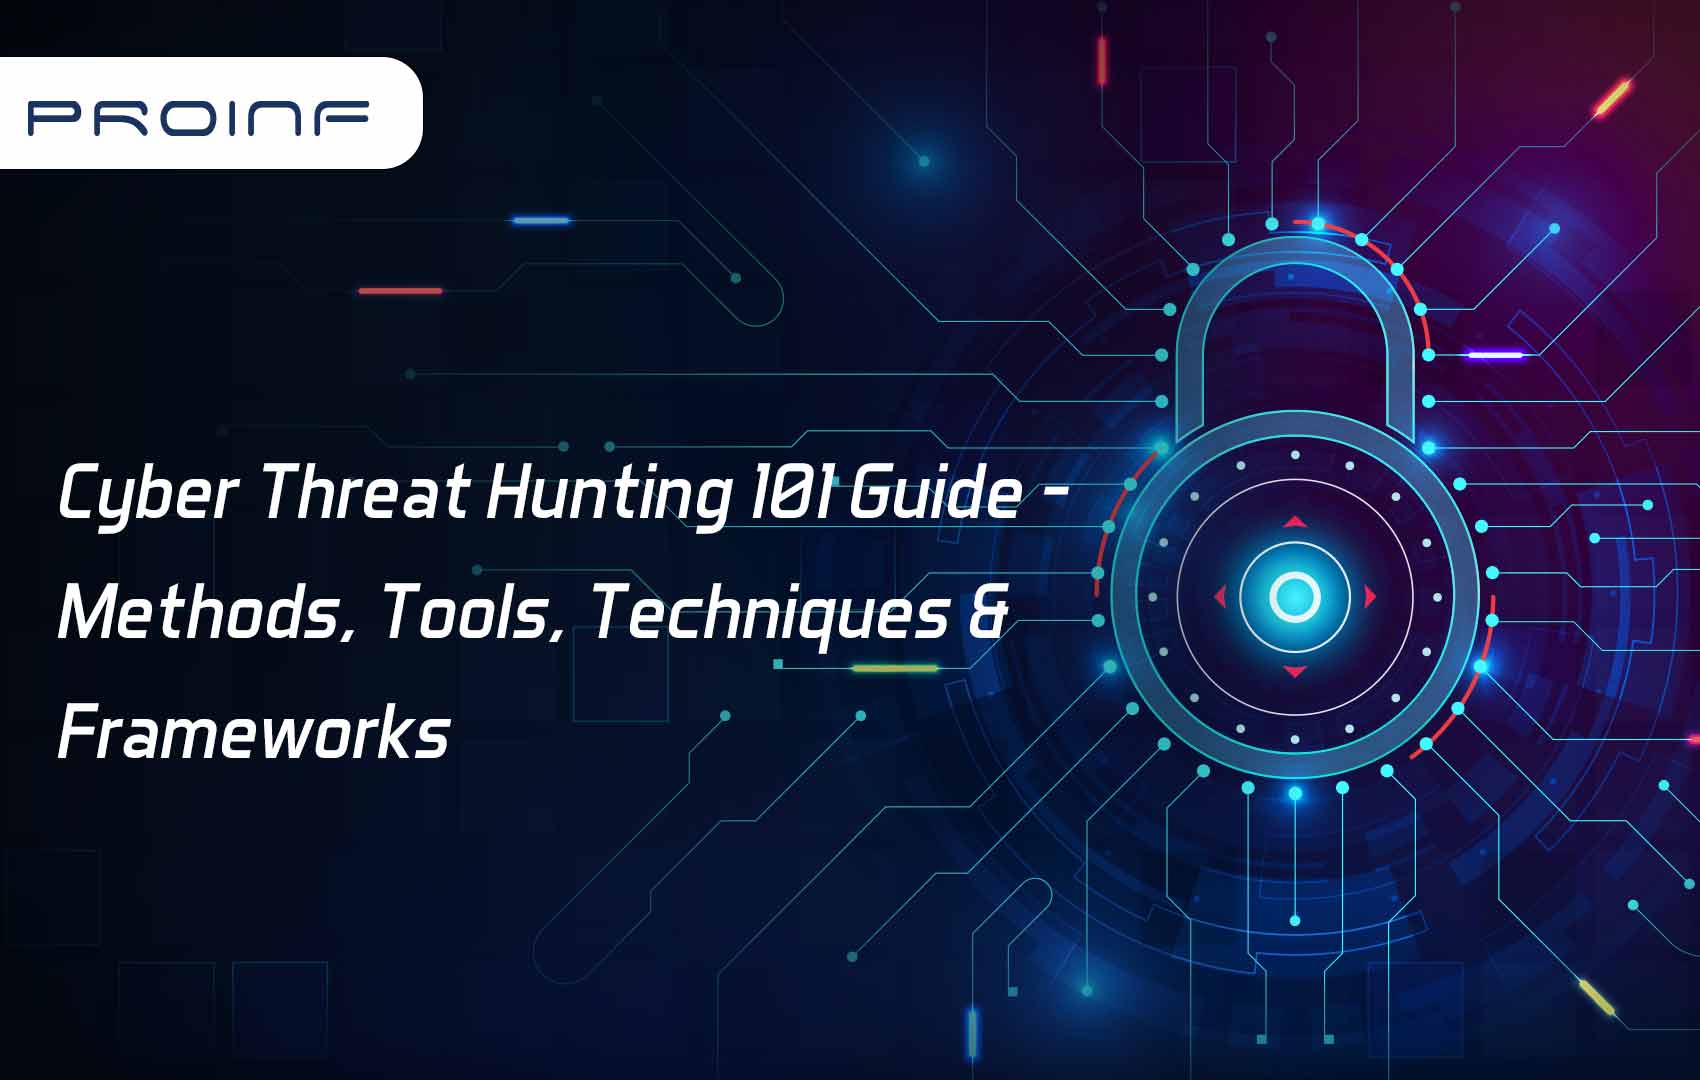 Cyber Threat Hunting 101 Guide - Methods, Tools, Techniques & Frameworks